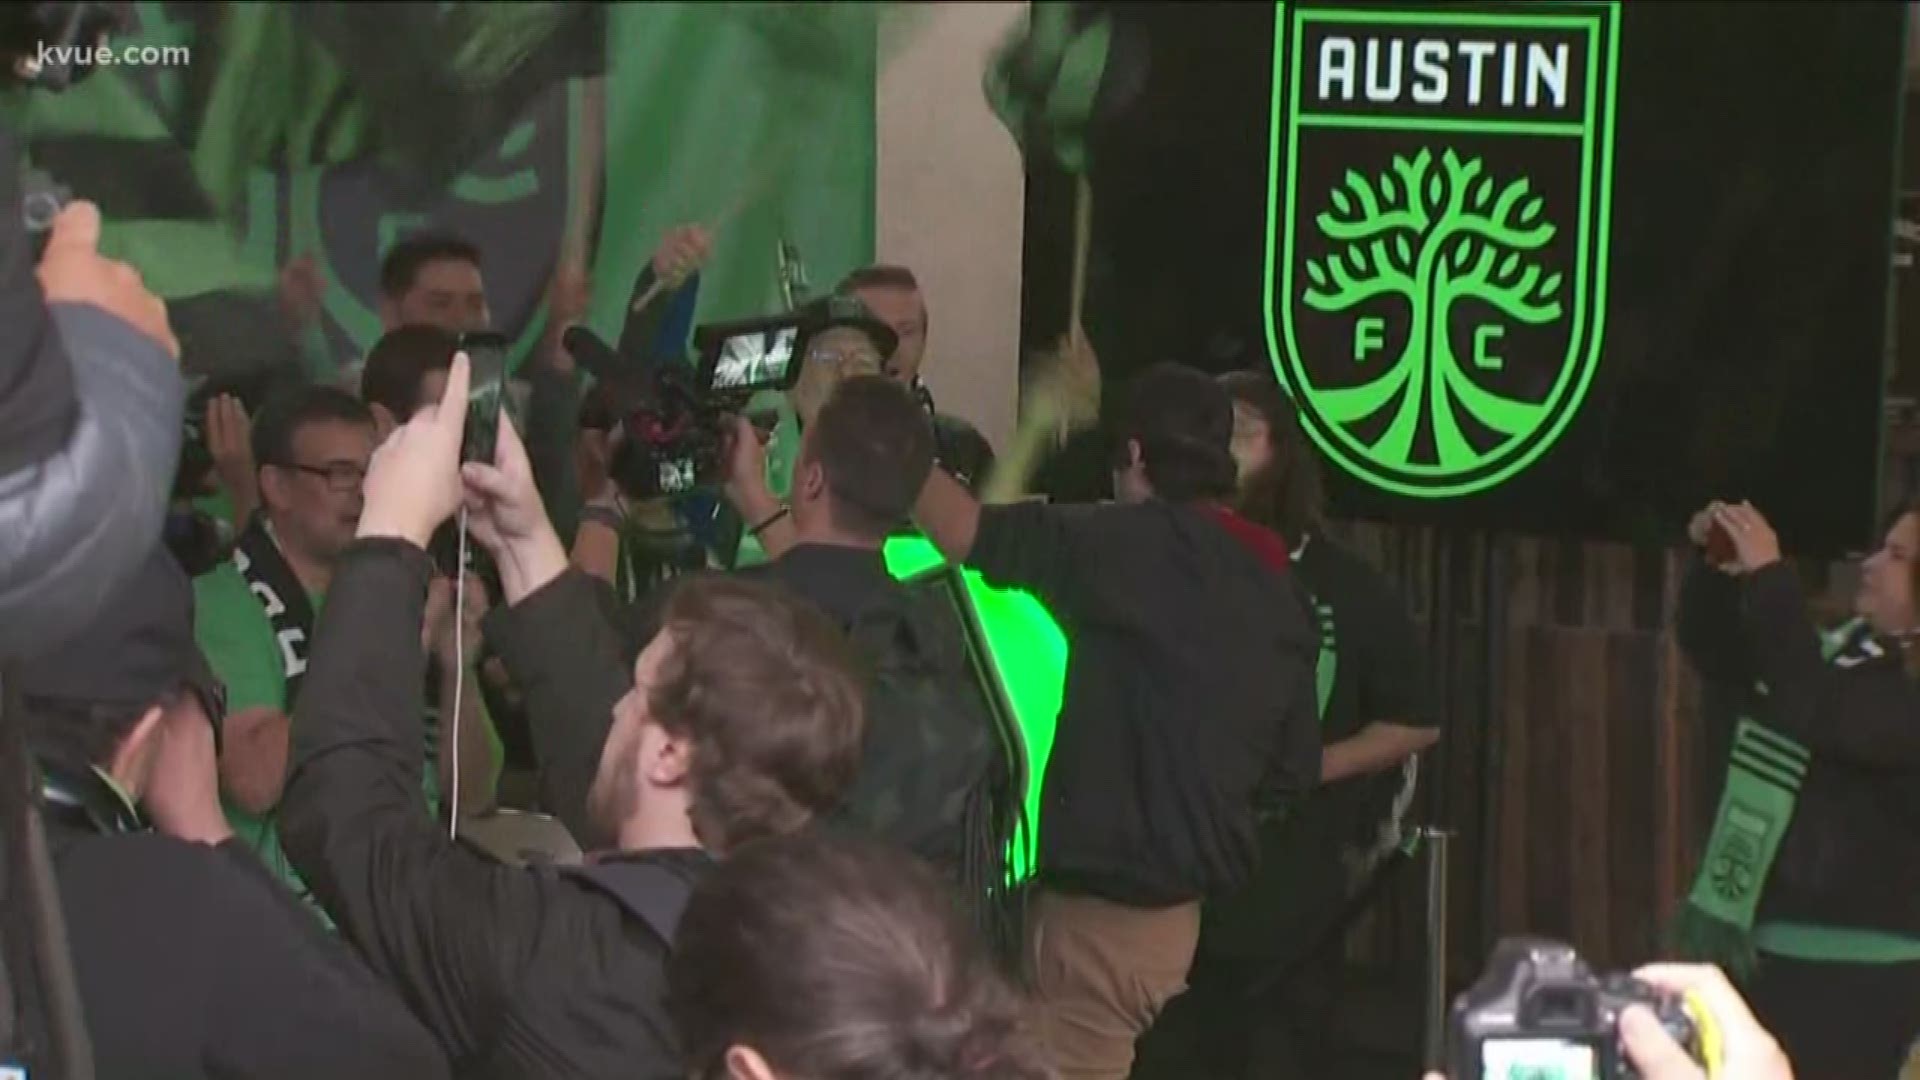 Austin FC will be the 27th team in Major League Soccer. Fans piled into Rustic Tap on Sixth Street on Tuesday to celebrate.